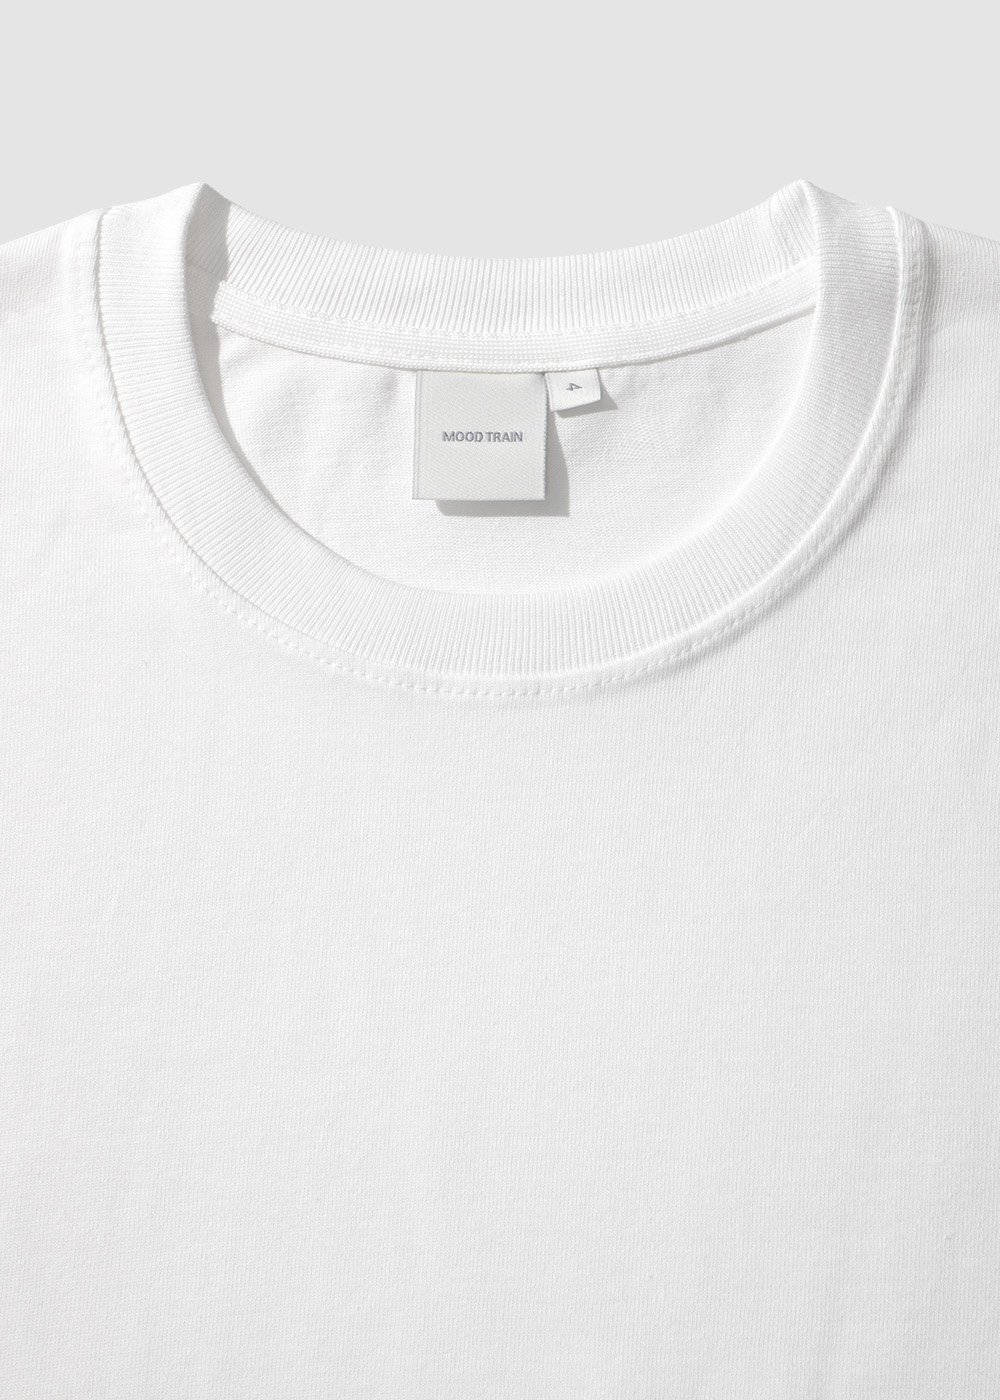 B. Silked Combed Cotton 100% 30/2 Single T-shirt _ white